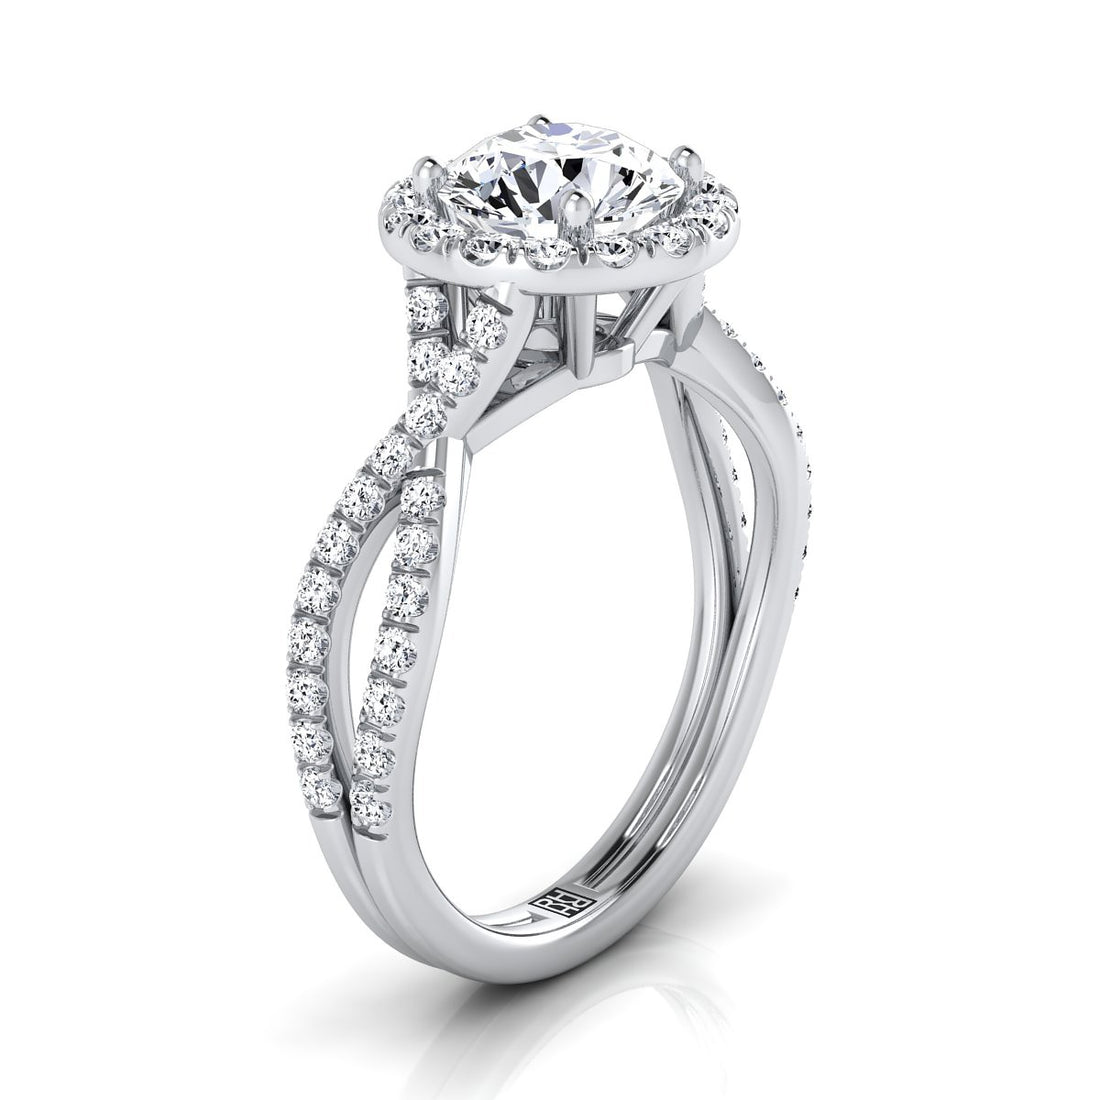 The Advantages of Owning an Infinity Diamond Engagement Ring